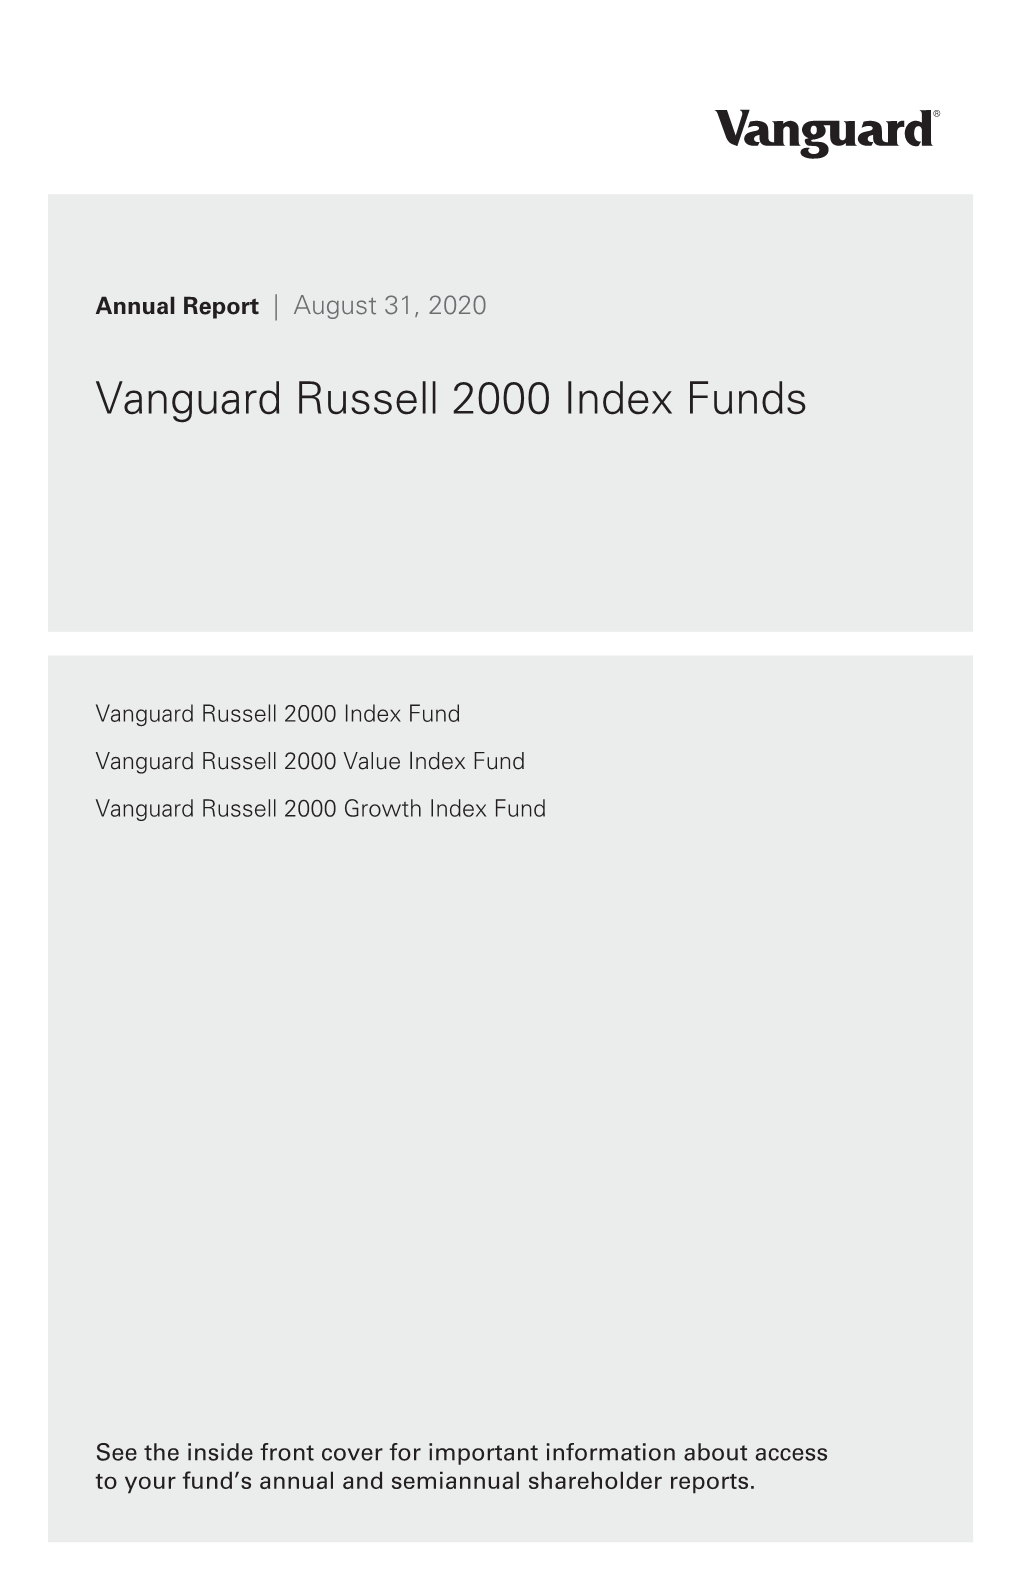 Vanguard Russell 2000 Index Funds Annual Report August 31, 2020